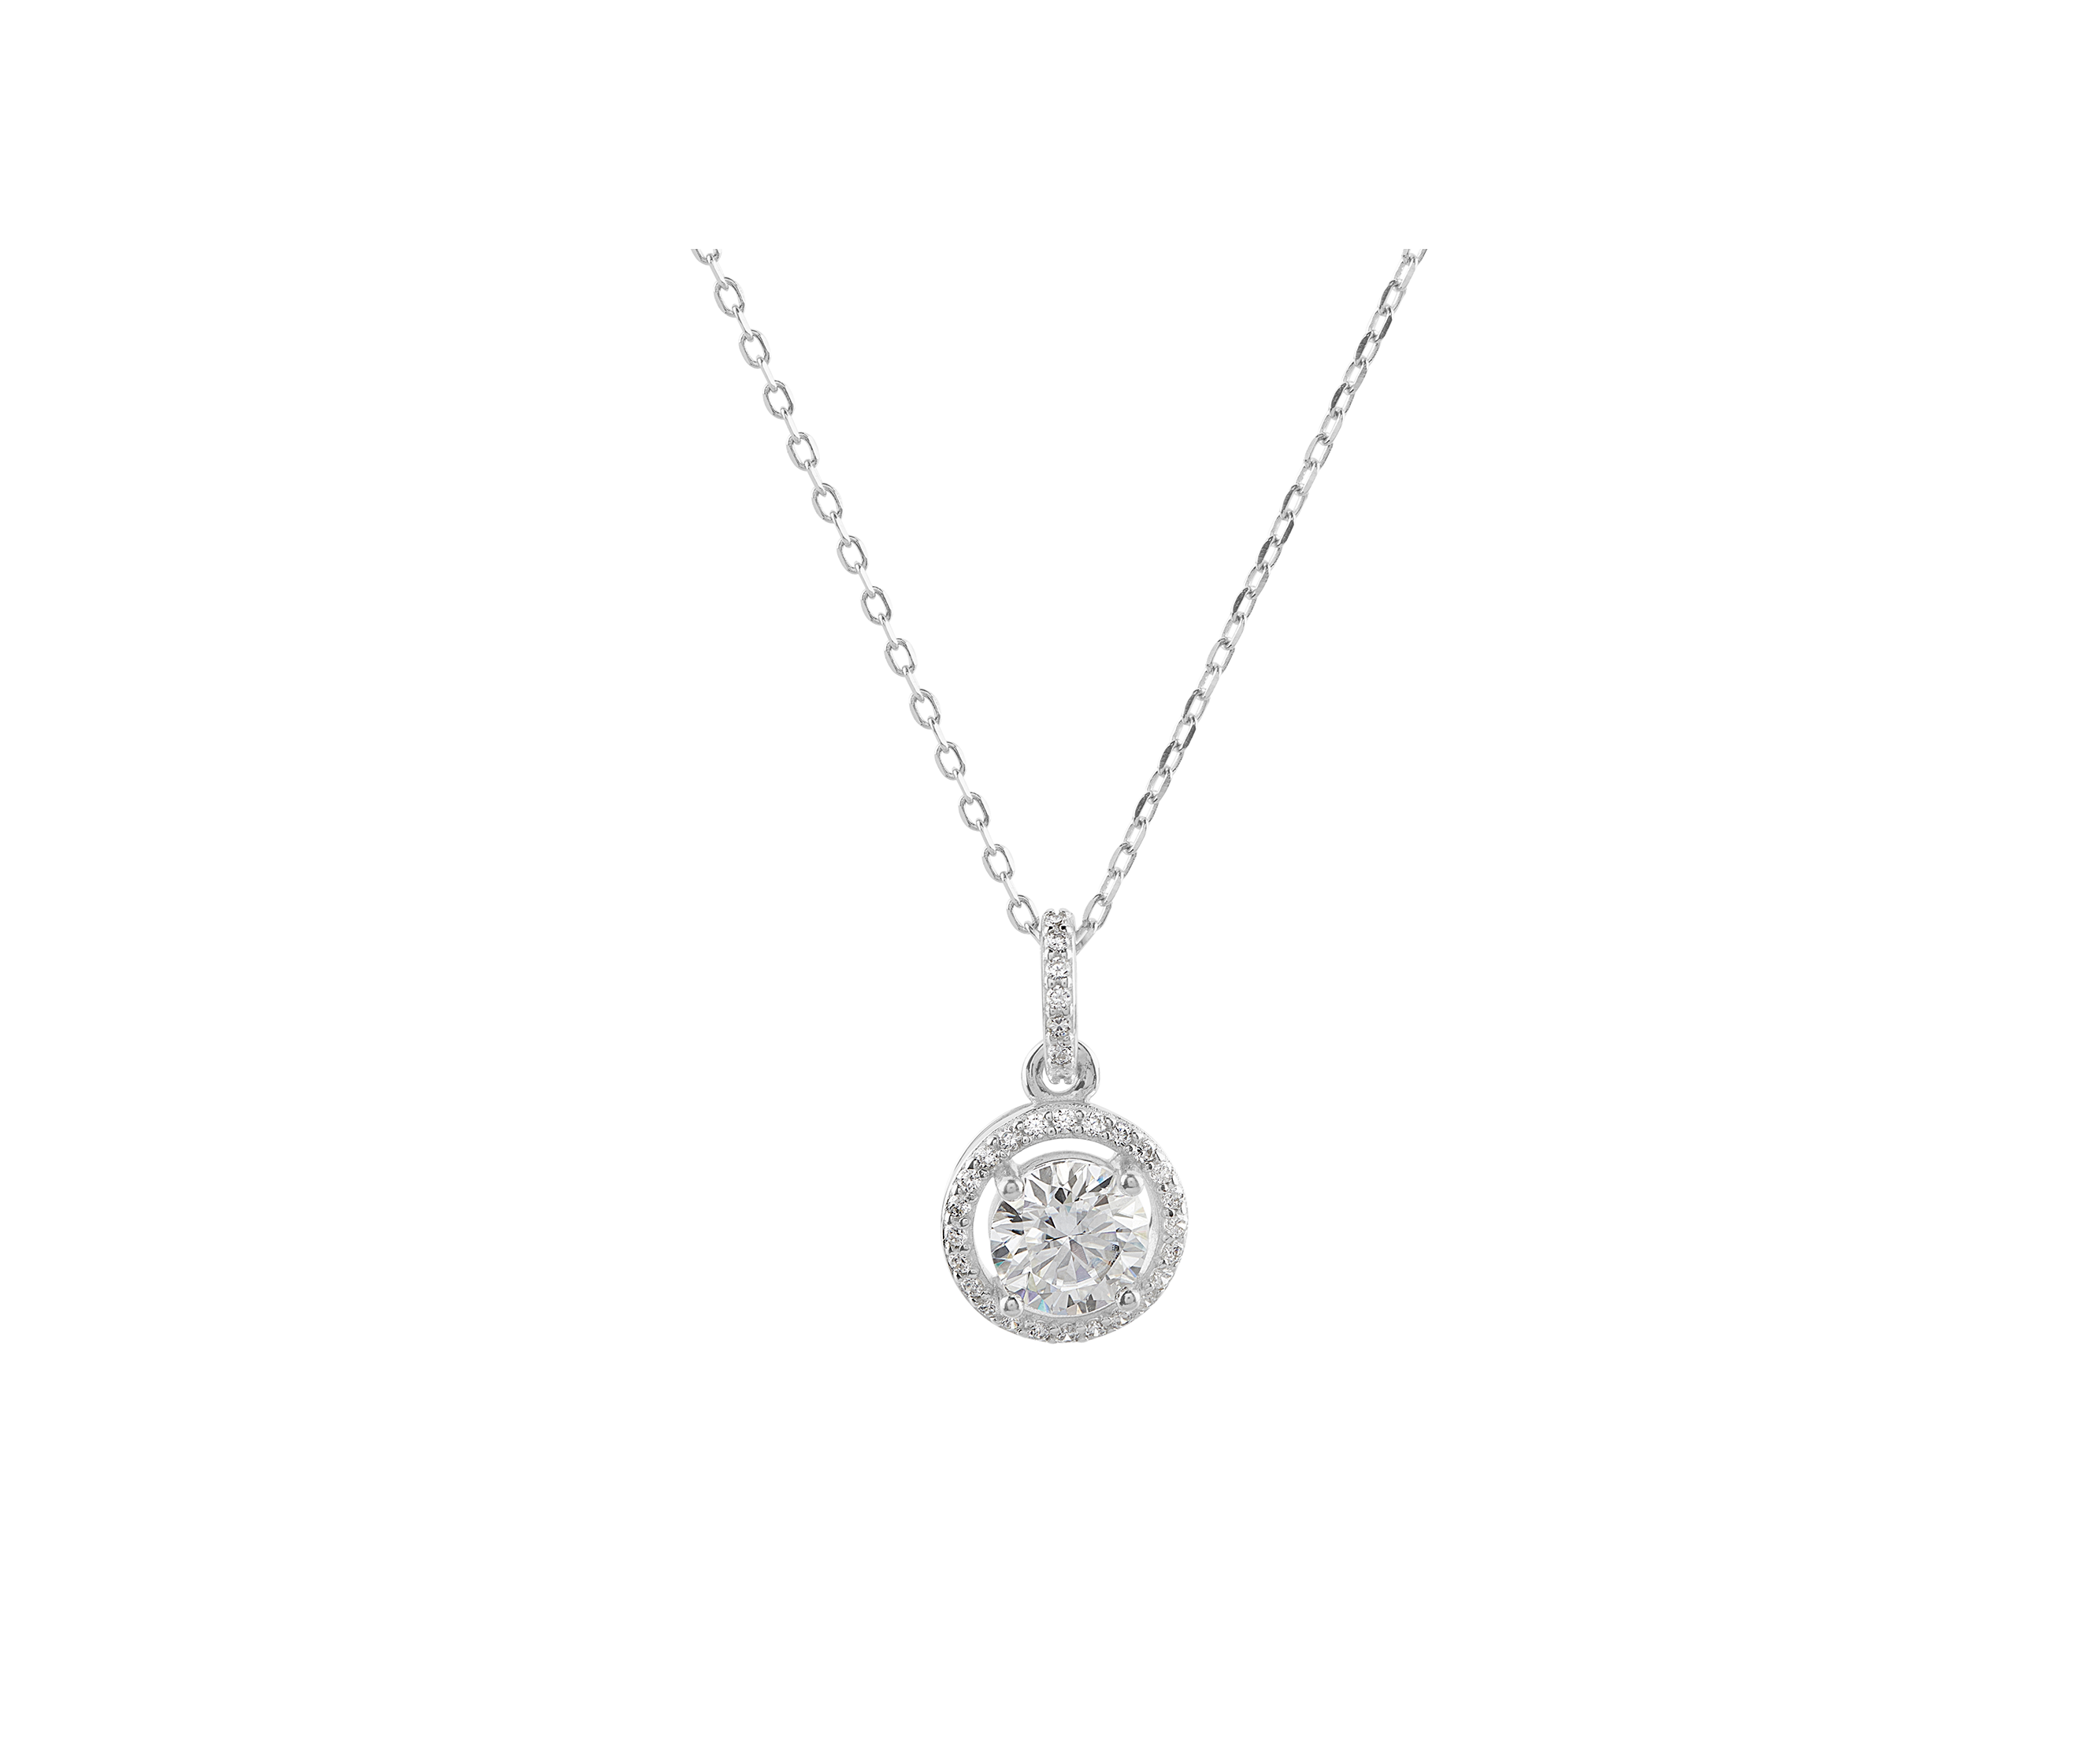 Circular Moissanite Stone Pendant with Sterling Silver Chain 